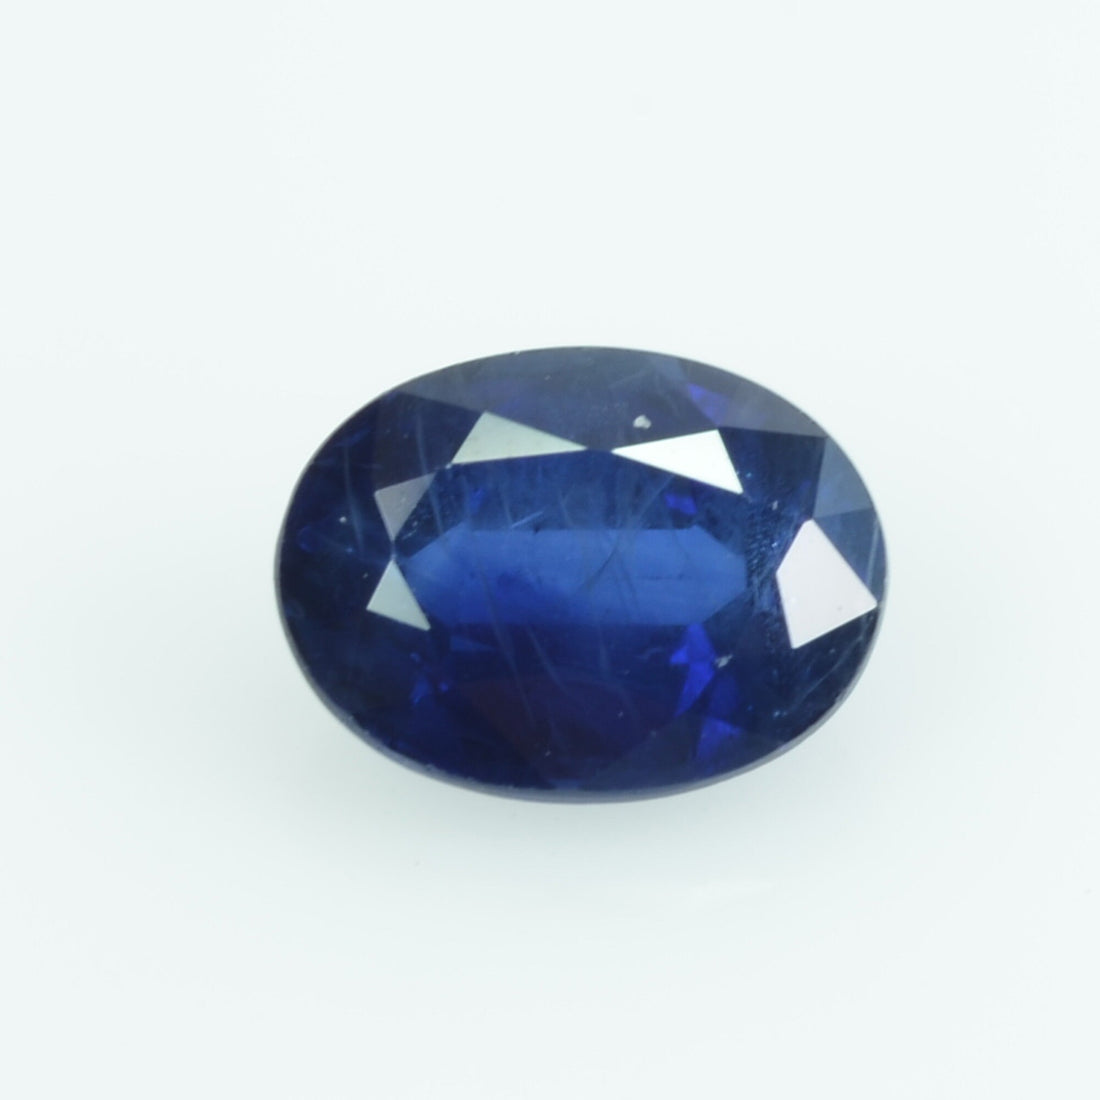 0.98 Cts Natural Blue Sapphire Loose Gemstone Oval Cut